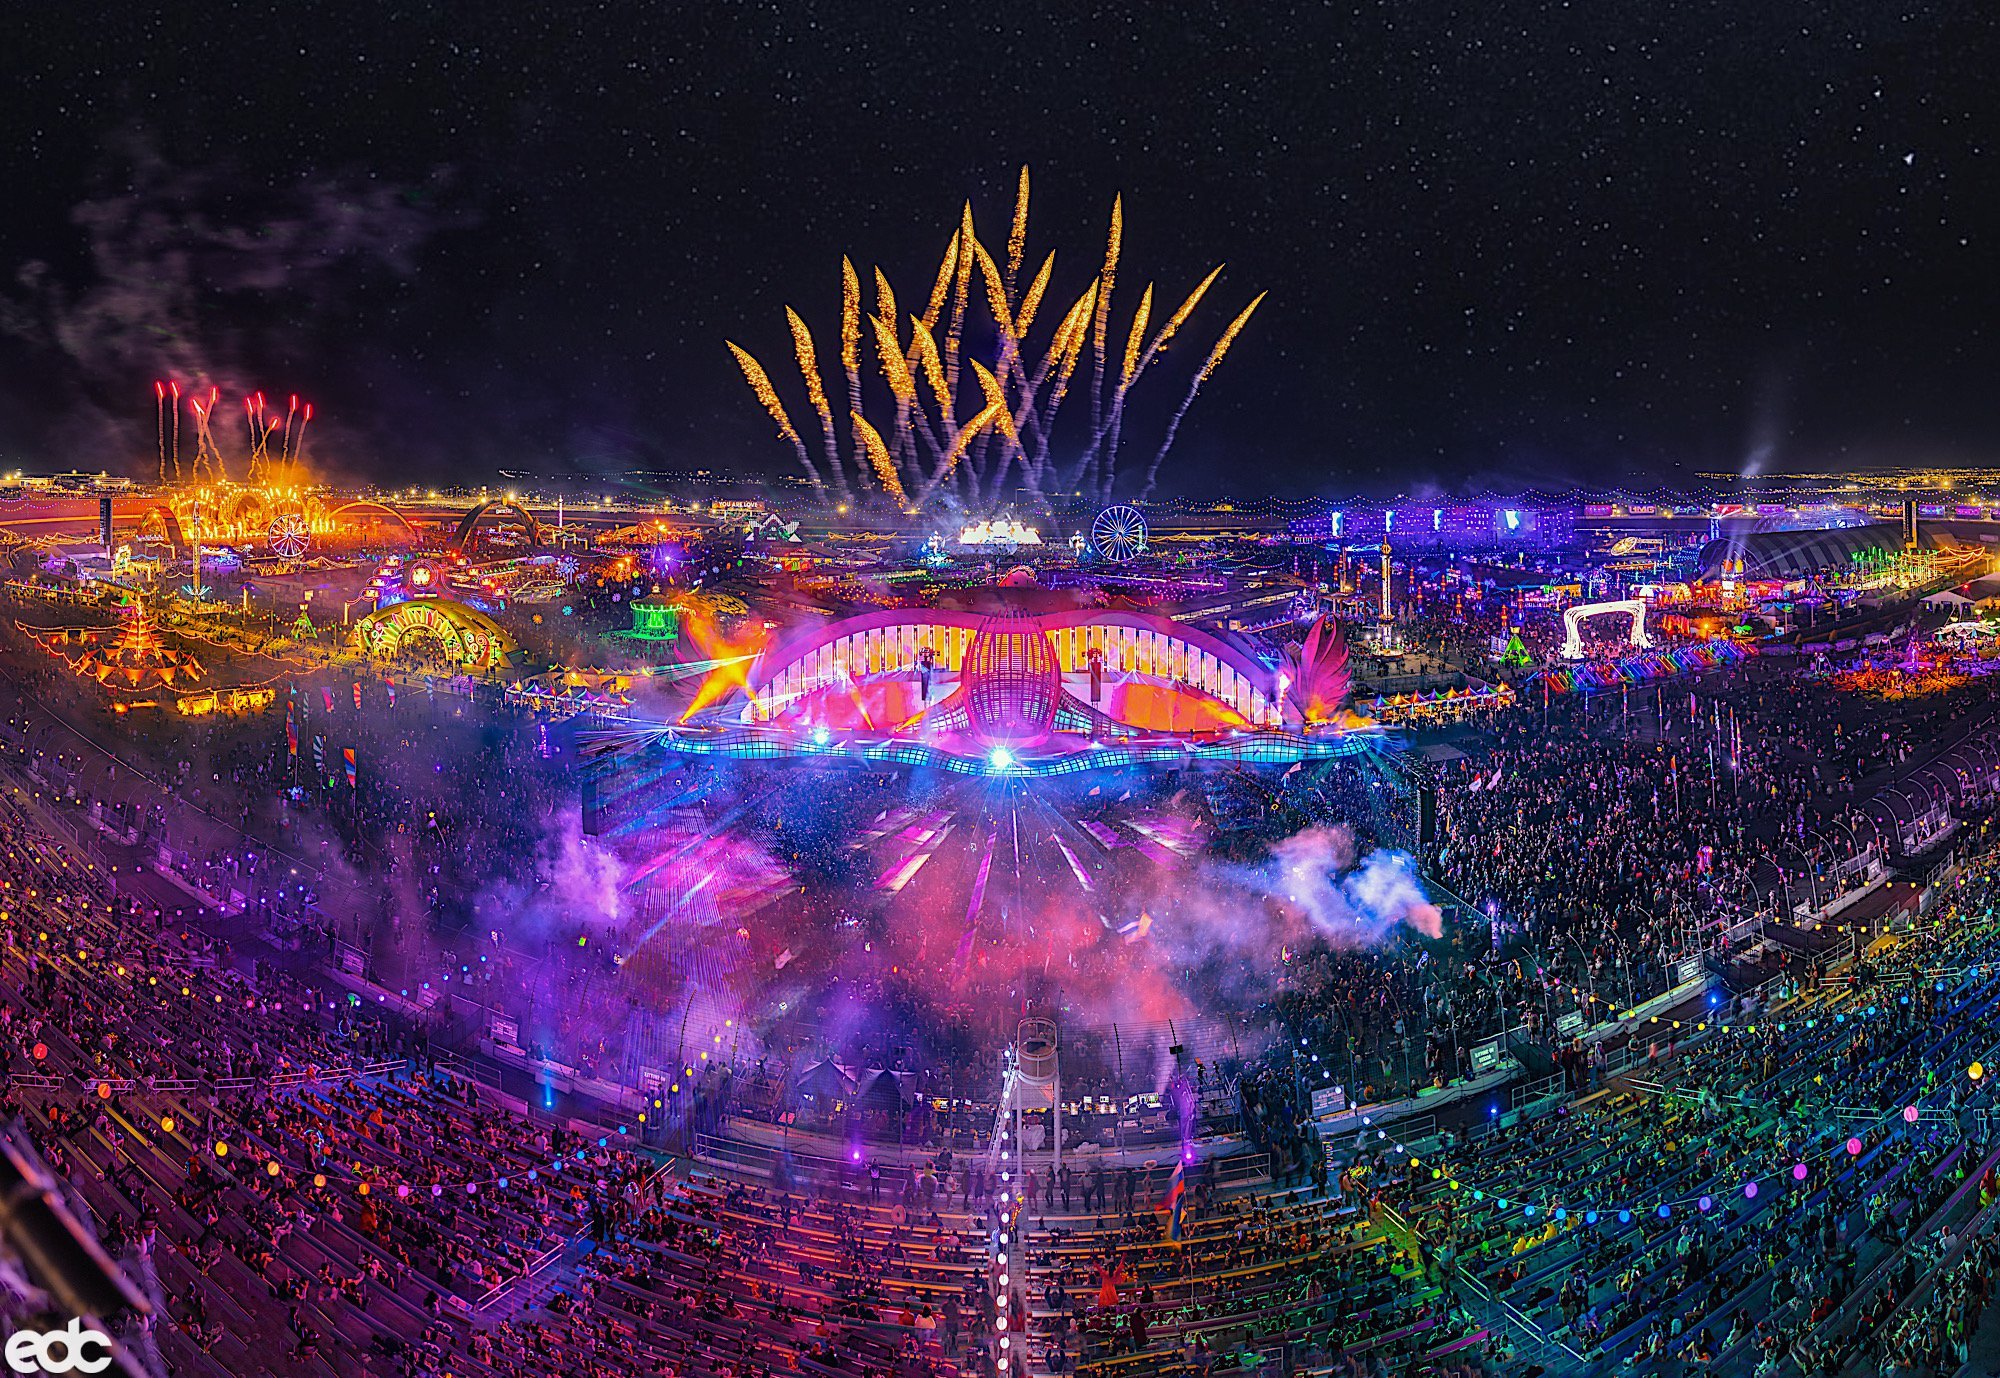 Luxury Shuttles to EDC Las Vegas!
⚡️ Ride with your friends on fun and affordable party buses to Las Vegas Motor Speedway, May 17-19, 2024.
⚡️ Pick up and return to Rio Area @palms or Fremont Street @circalasvegas
⚡Book your shuttle pass at mridelasv